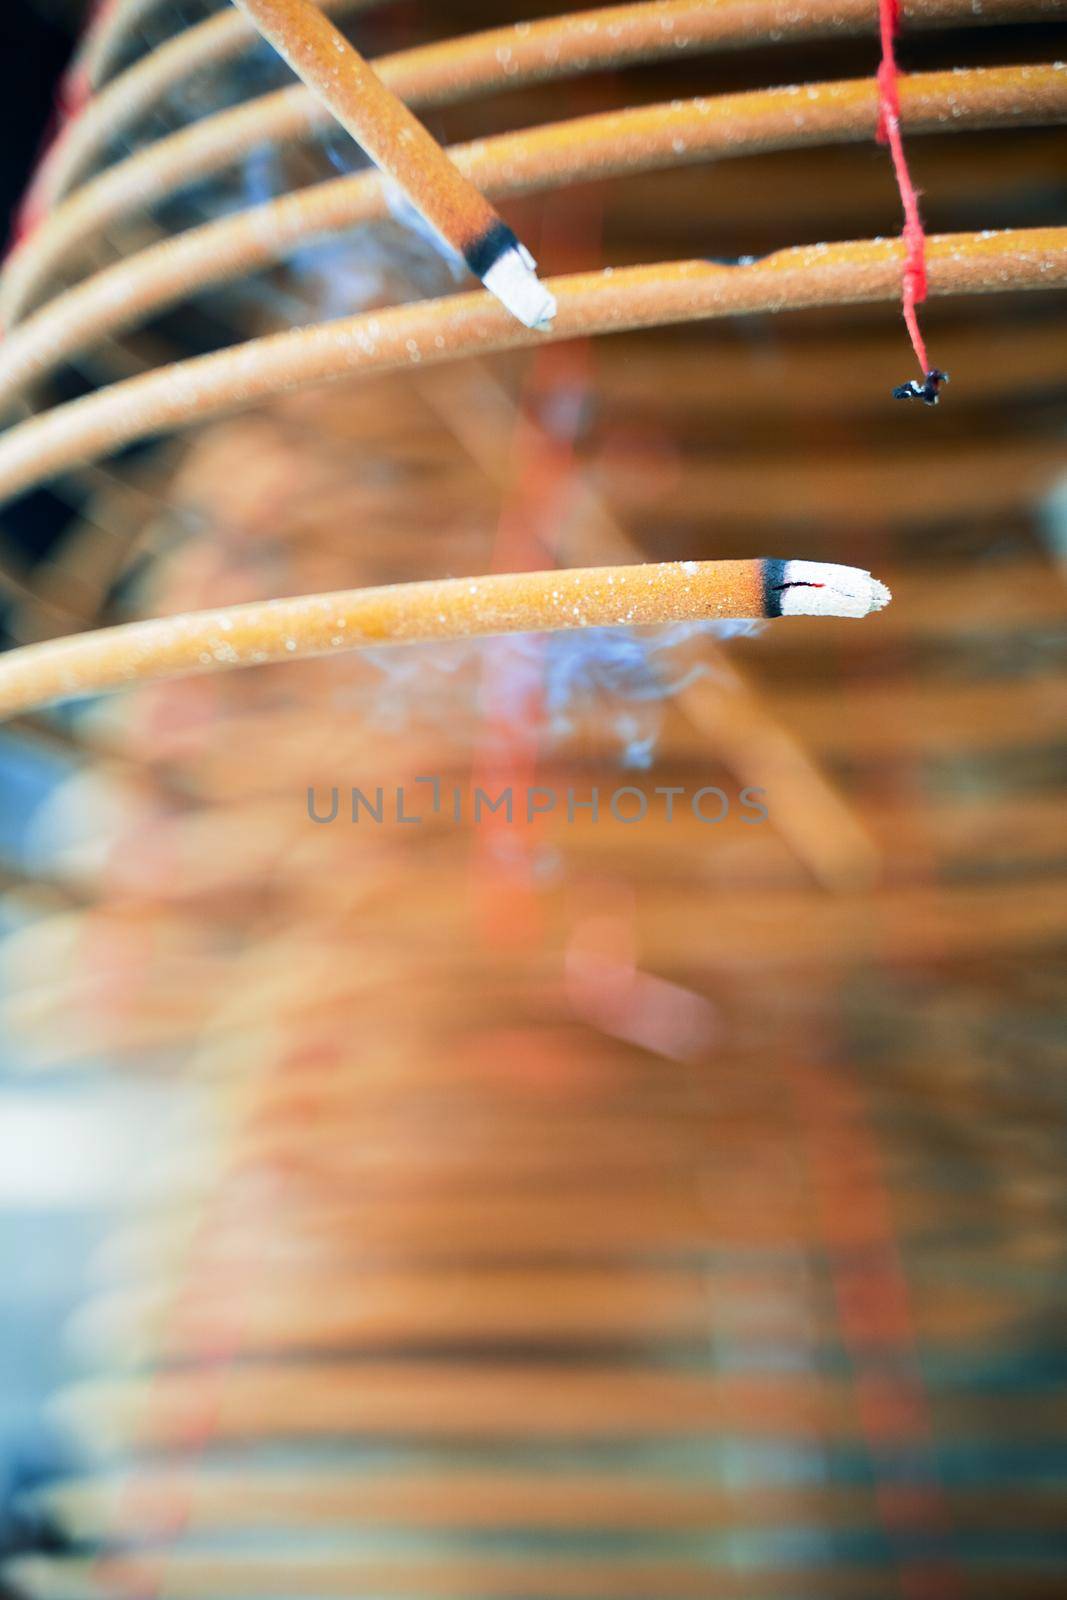 Burned coil swirl incense in Macau (Macao) temple, traditional Chinese cultural customs to worship god, close up, lifestyle.